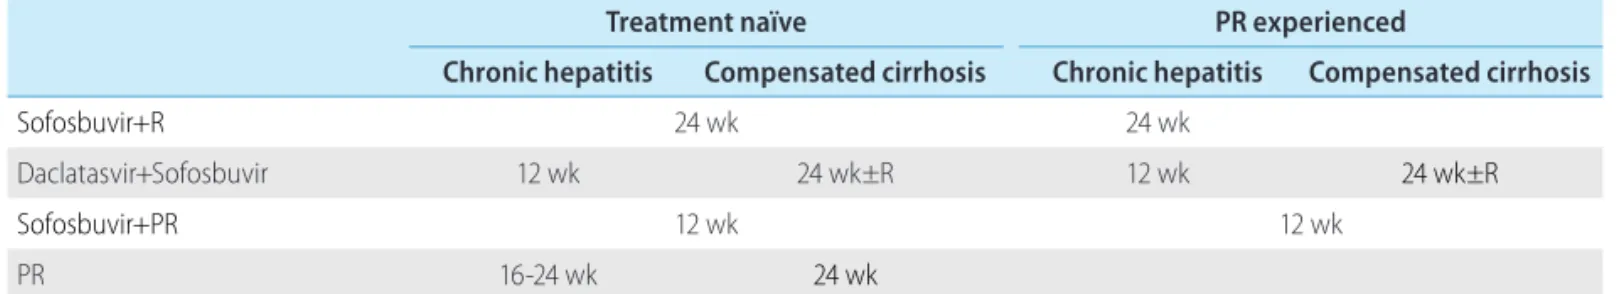 Table 9. Treatment of HCV genotype 3 infection in chronic hepatitis or compensated cirrhosis 　